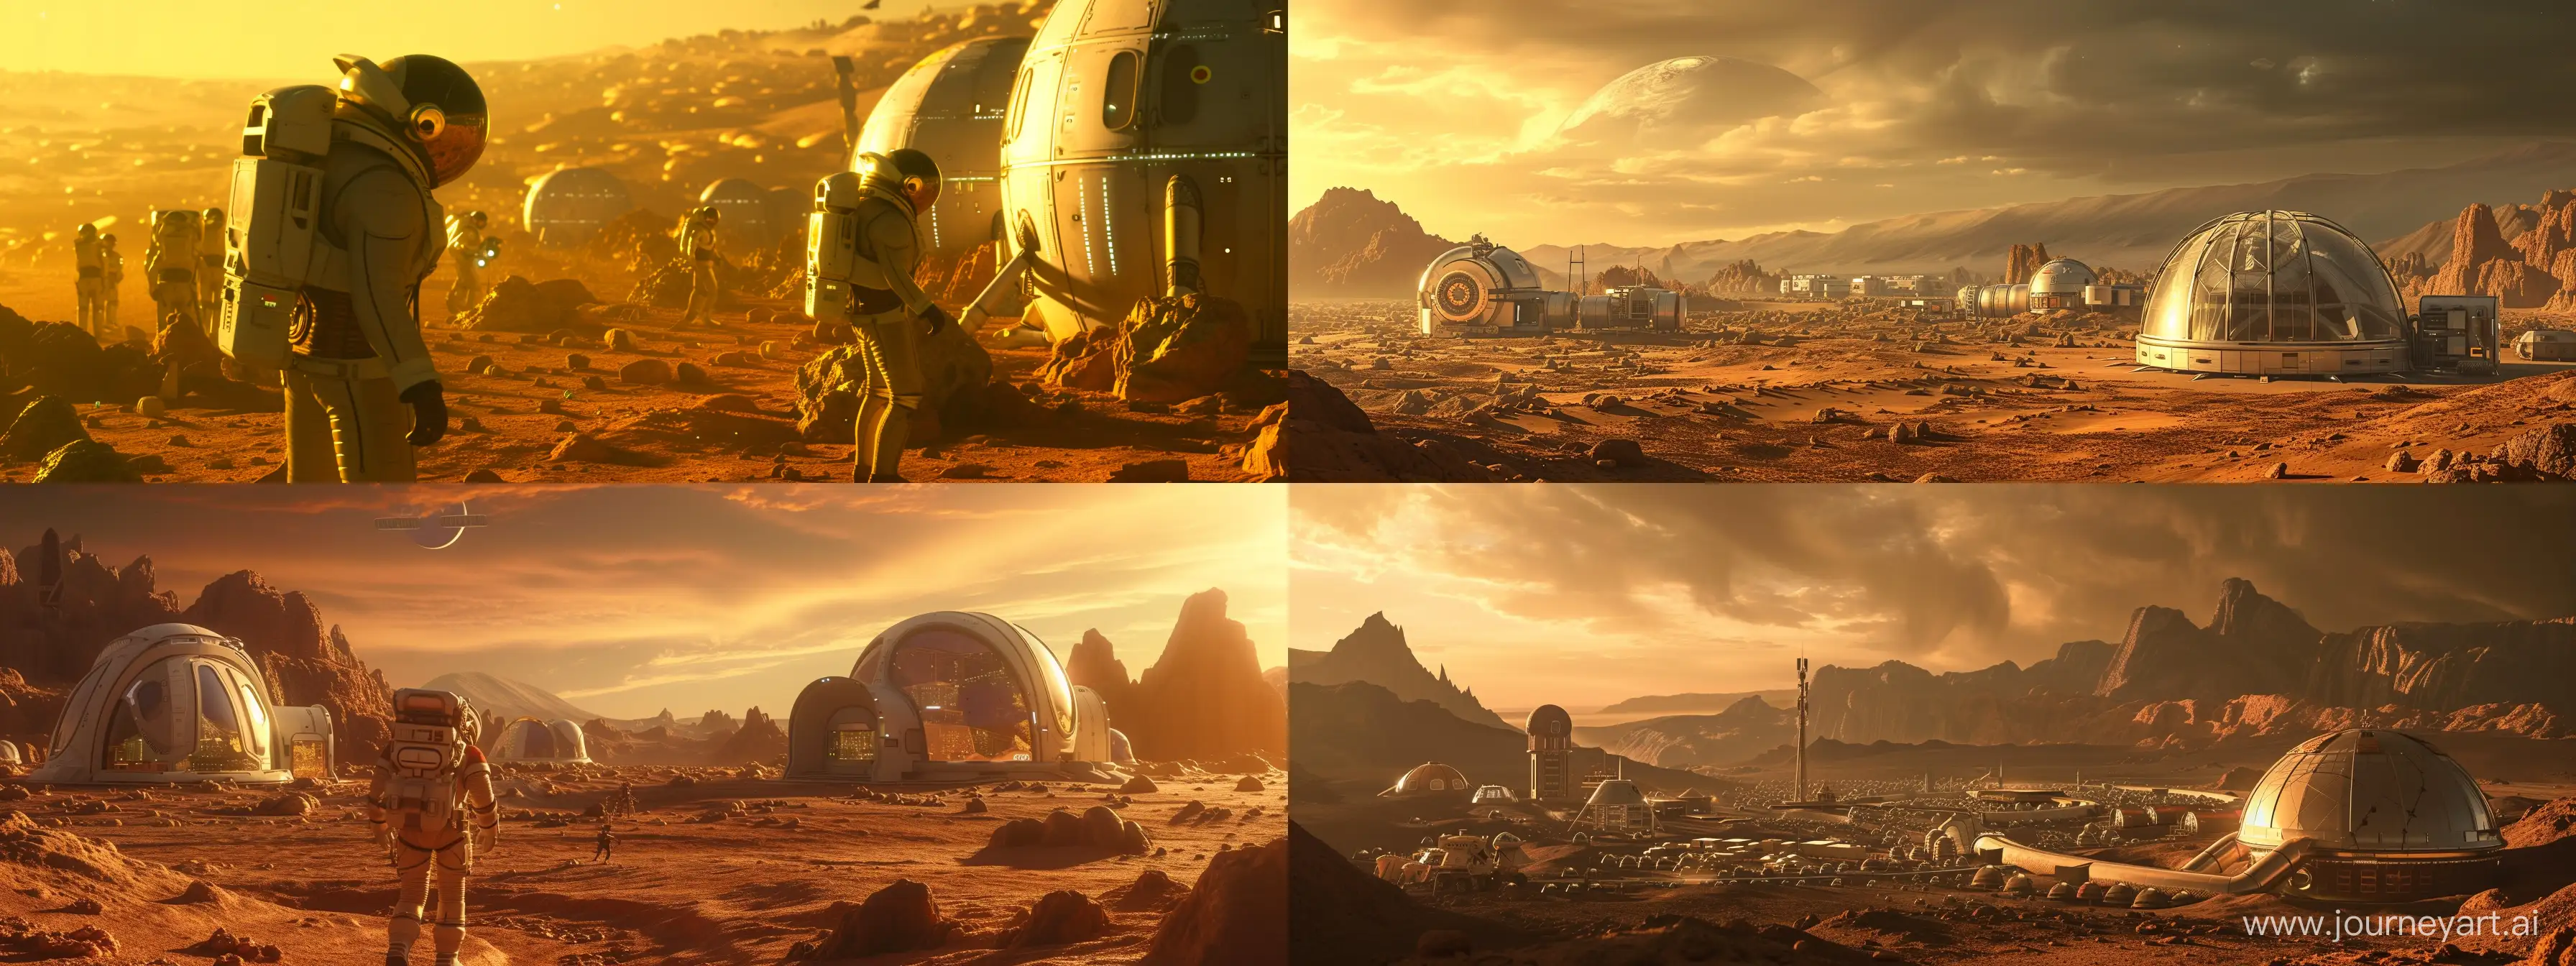 Epic-4K-Mars-Colonization-Movie-Still-with-Stunning-Quality-and-Animation-Similar-to-Piper-Discovering-the-World